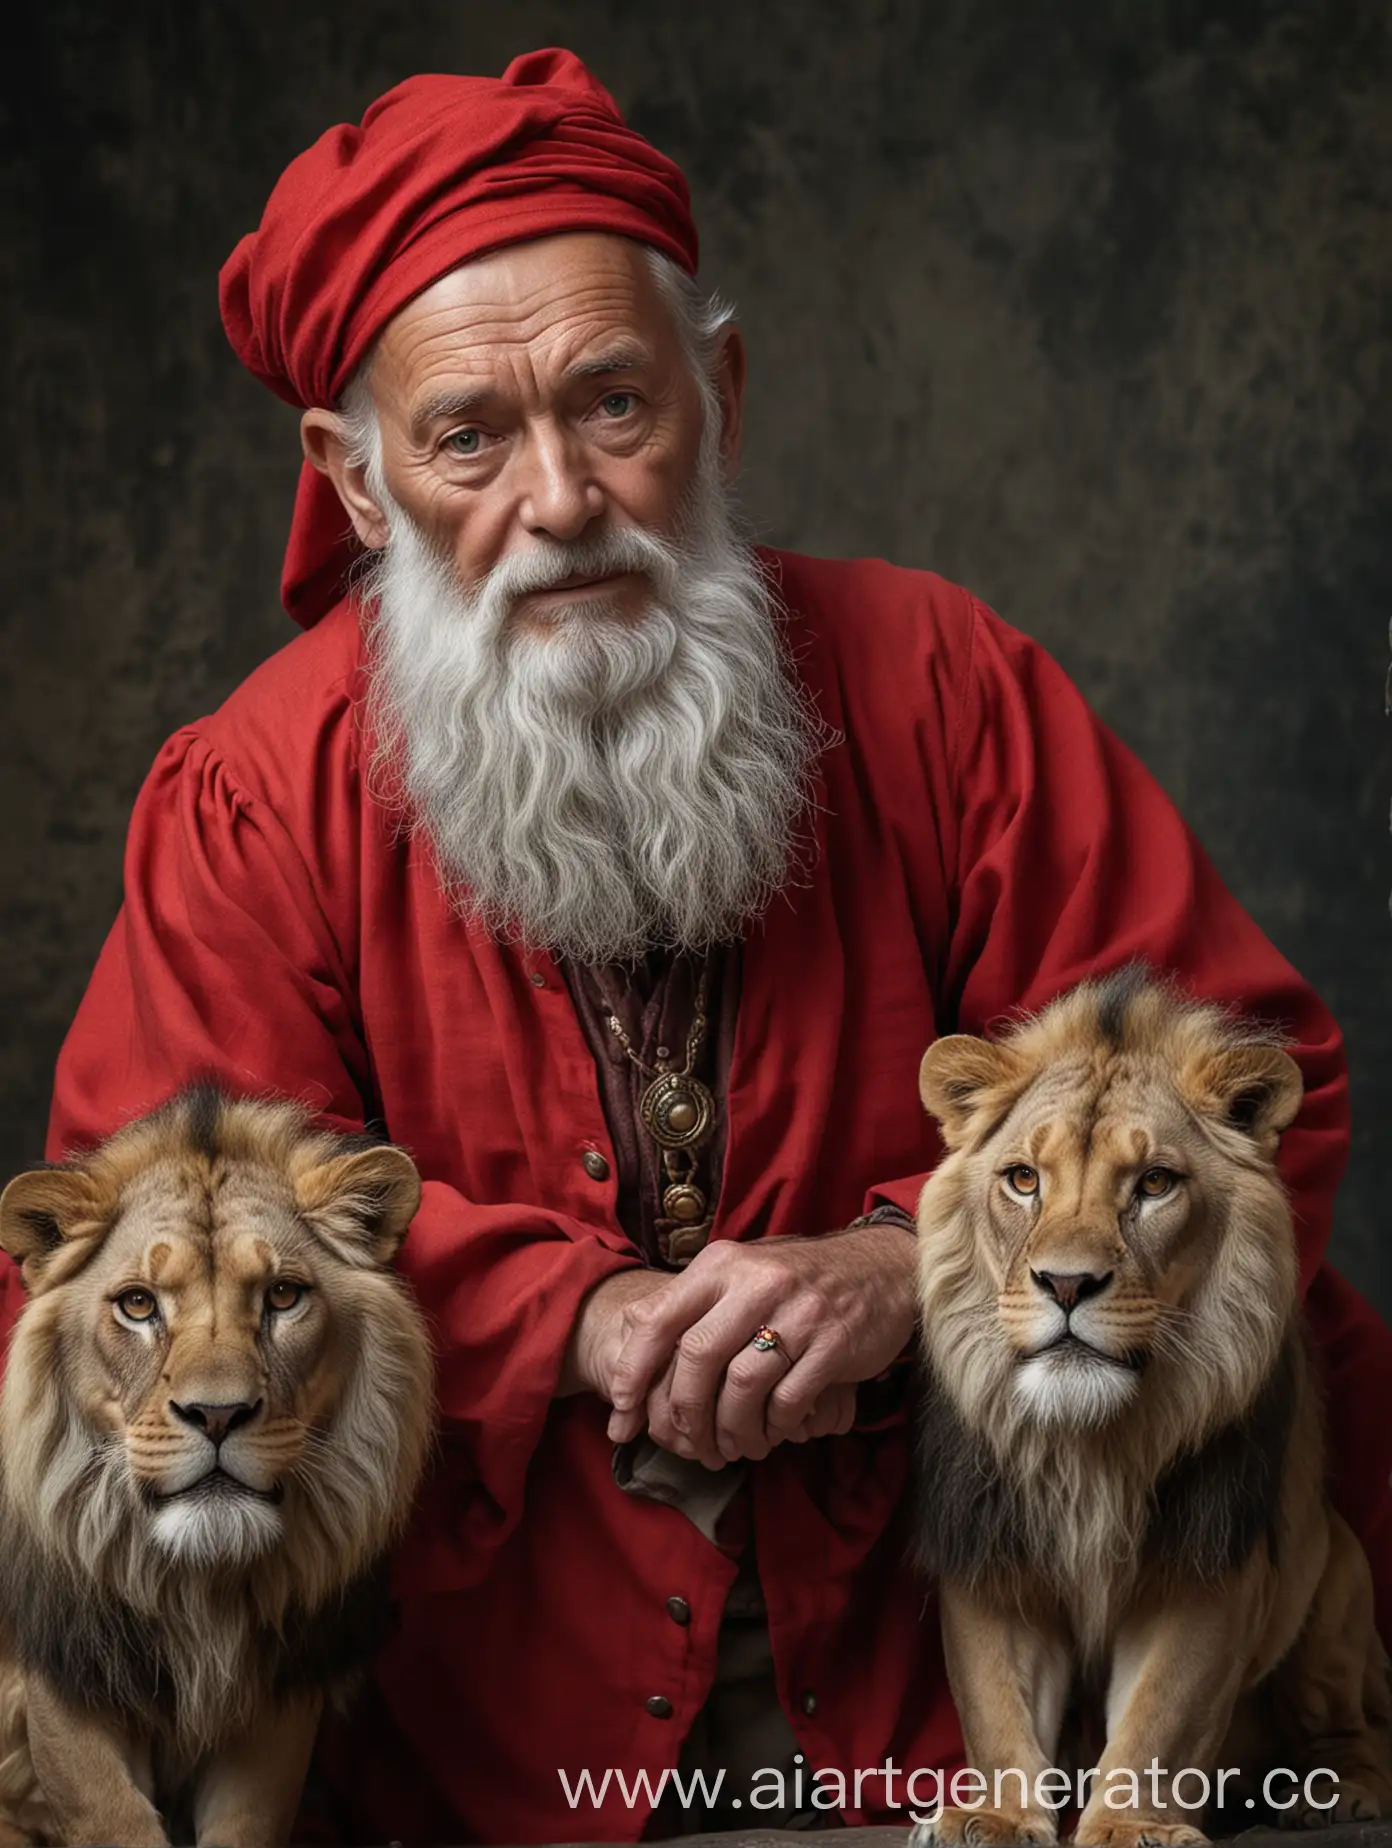 Wise-GreyBearded-Man-Contemplating-with-Lions-at-His-Feet